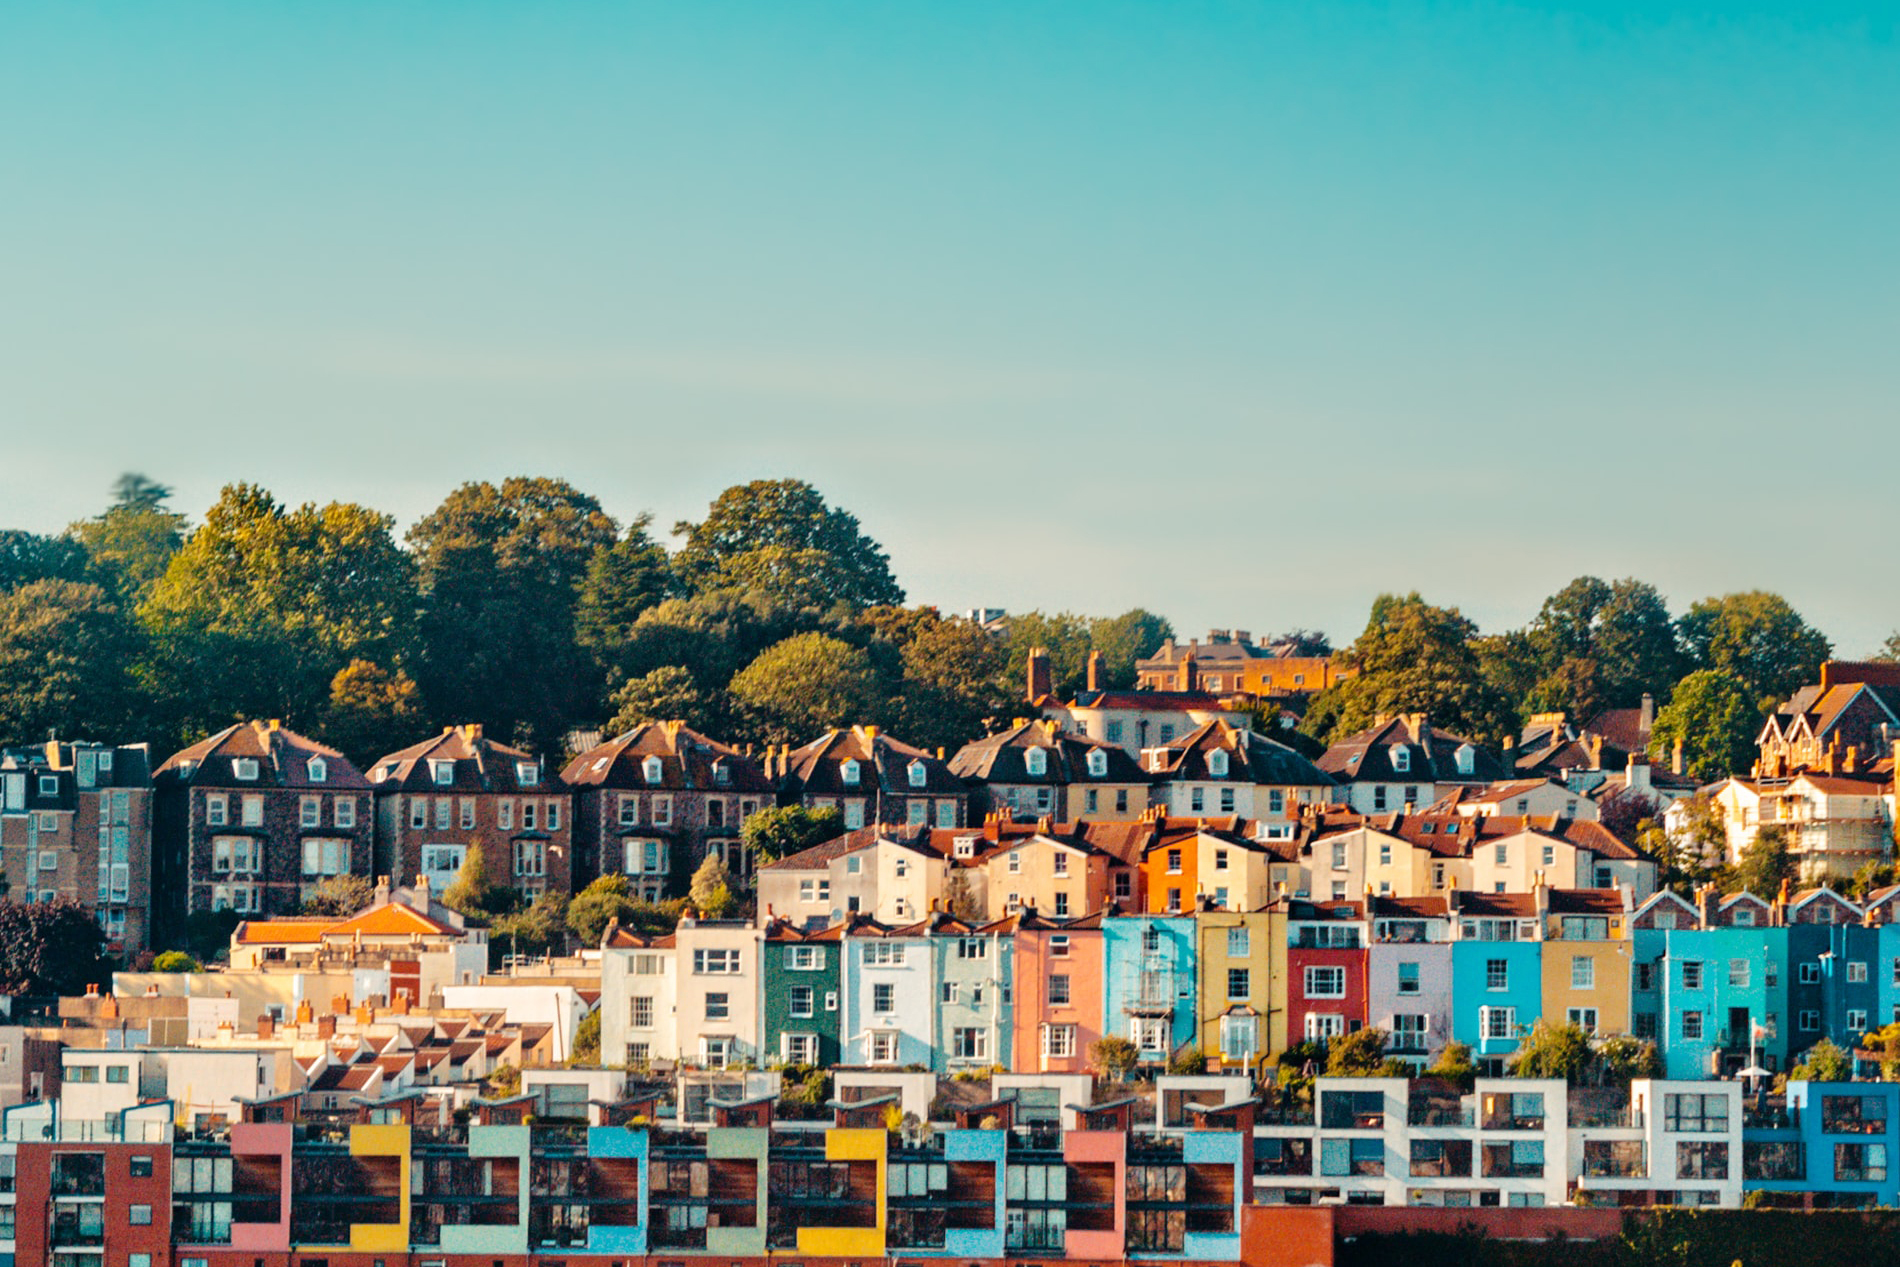 10 Best Places To Live In Bristol According To Residents